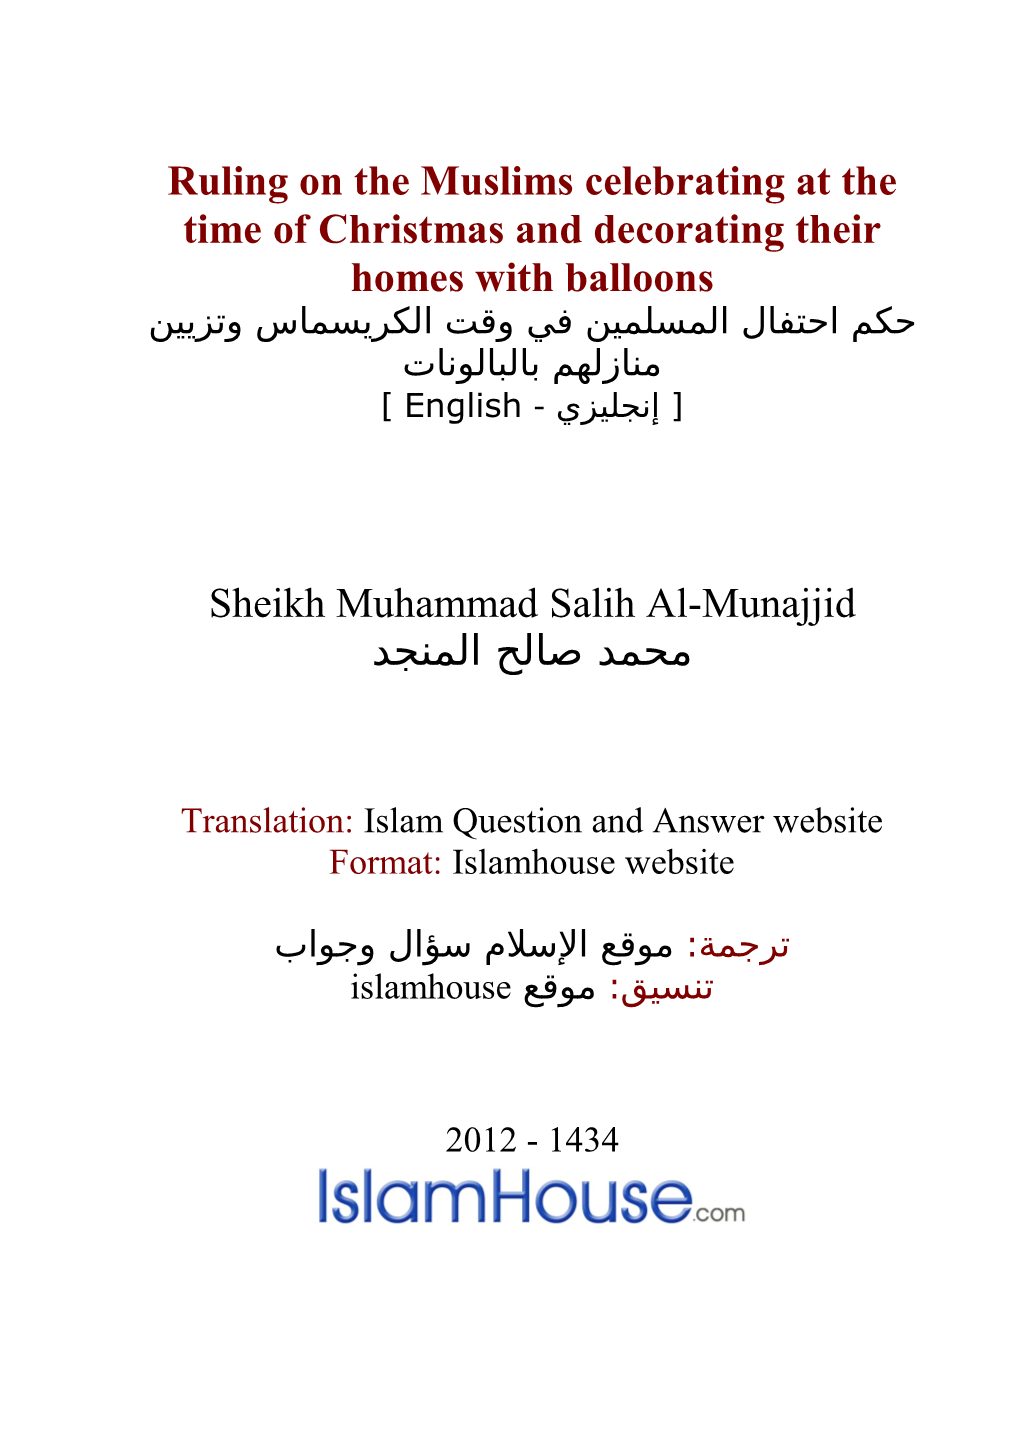 Ruling on the Muslims Celebrating at the Time of Christmas and Decorating Their Homes With